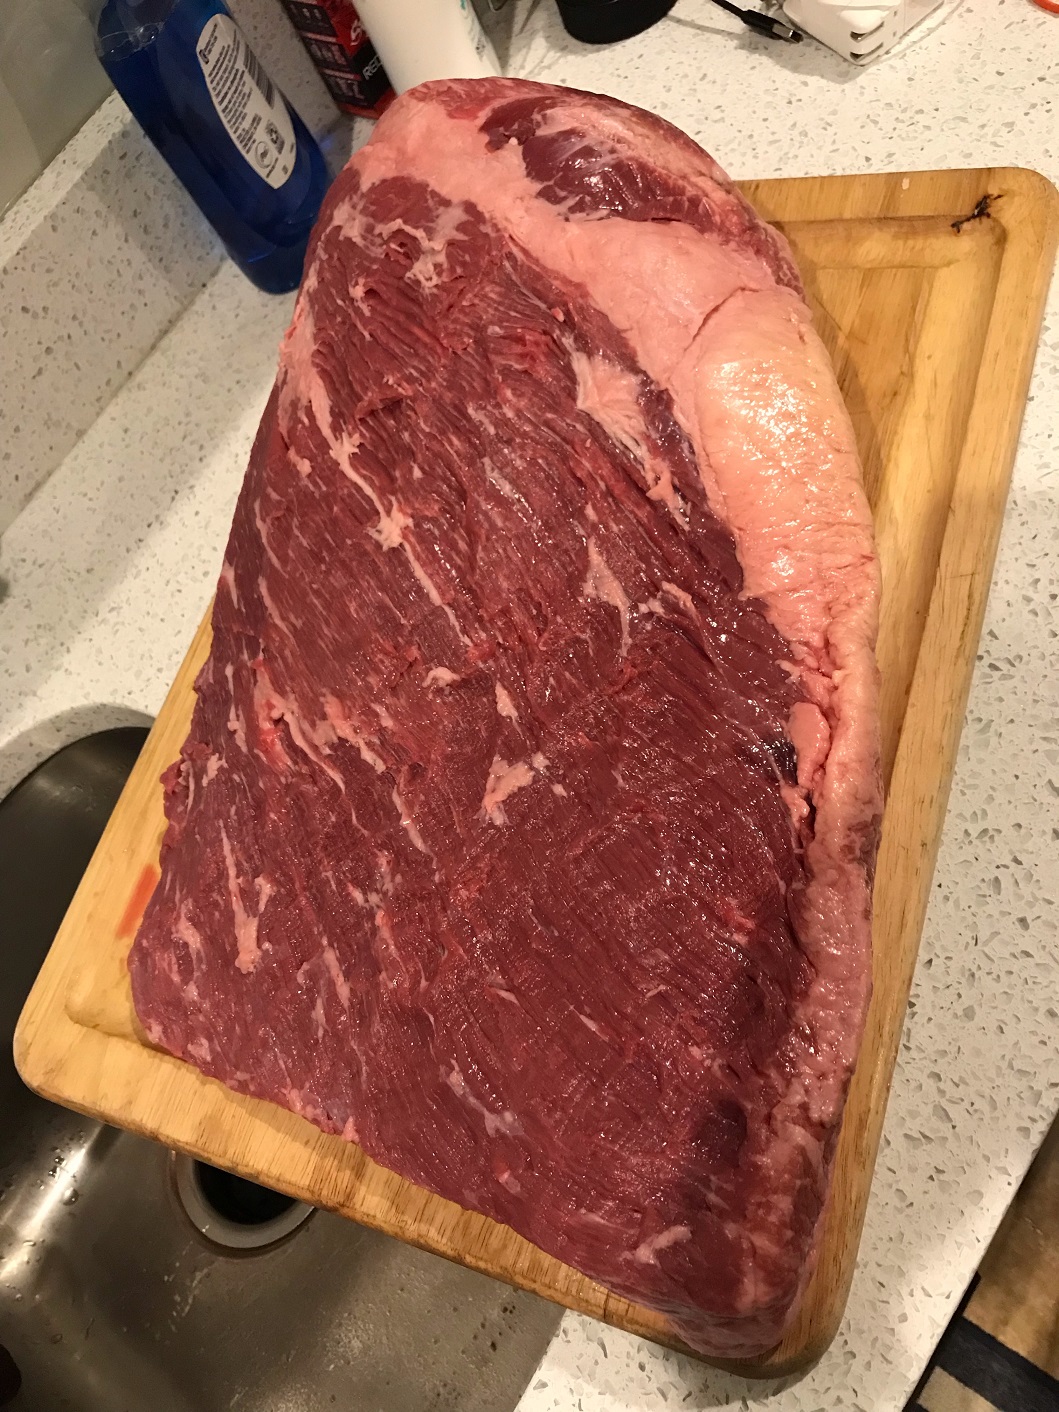 How the brisket should look after you trim the silver skin.